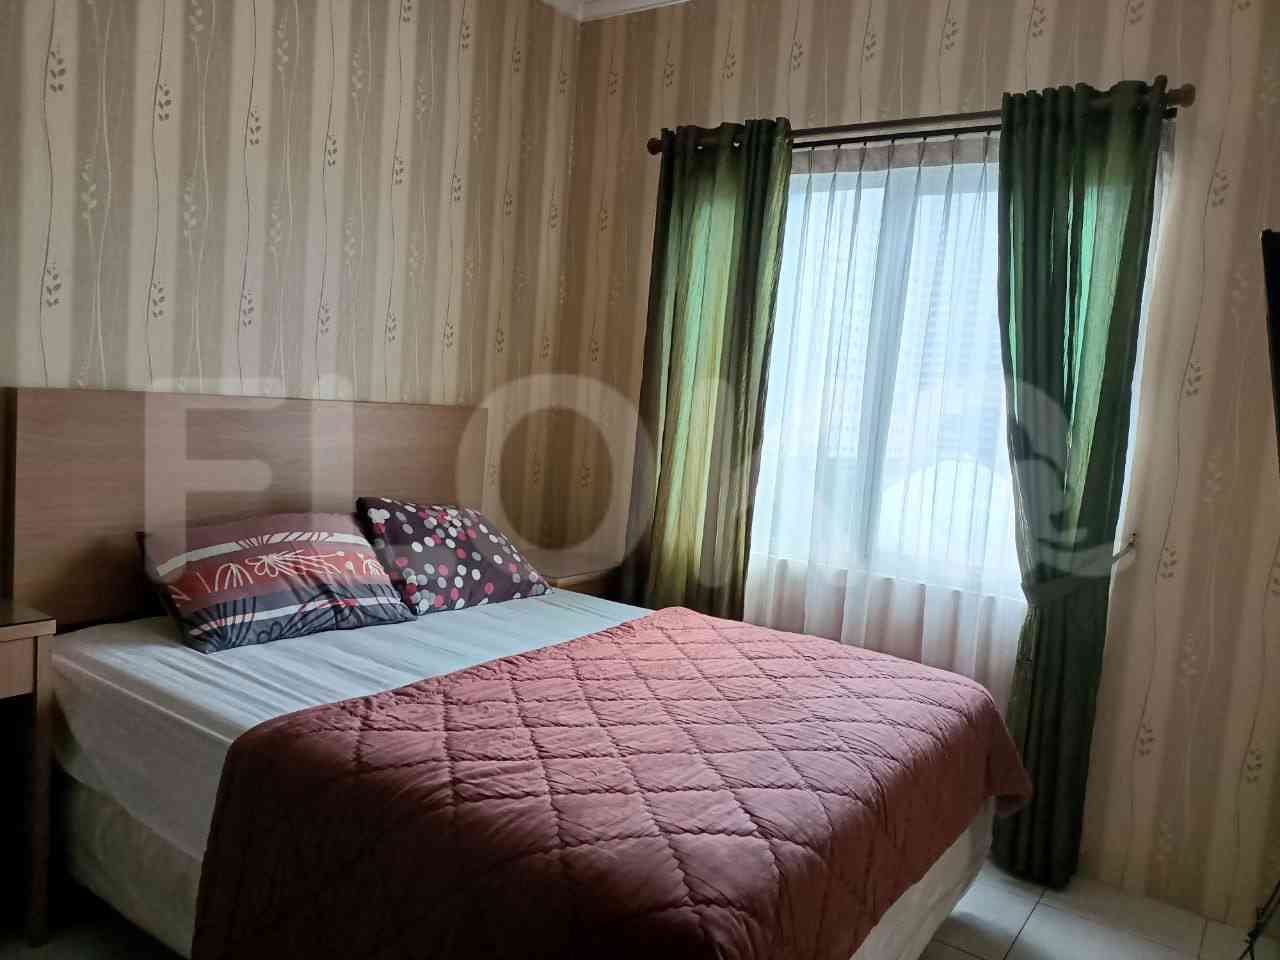 2 Bedroom on 7th Floor for Rent in Sudirman Park Apartment - ftad1f 1